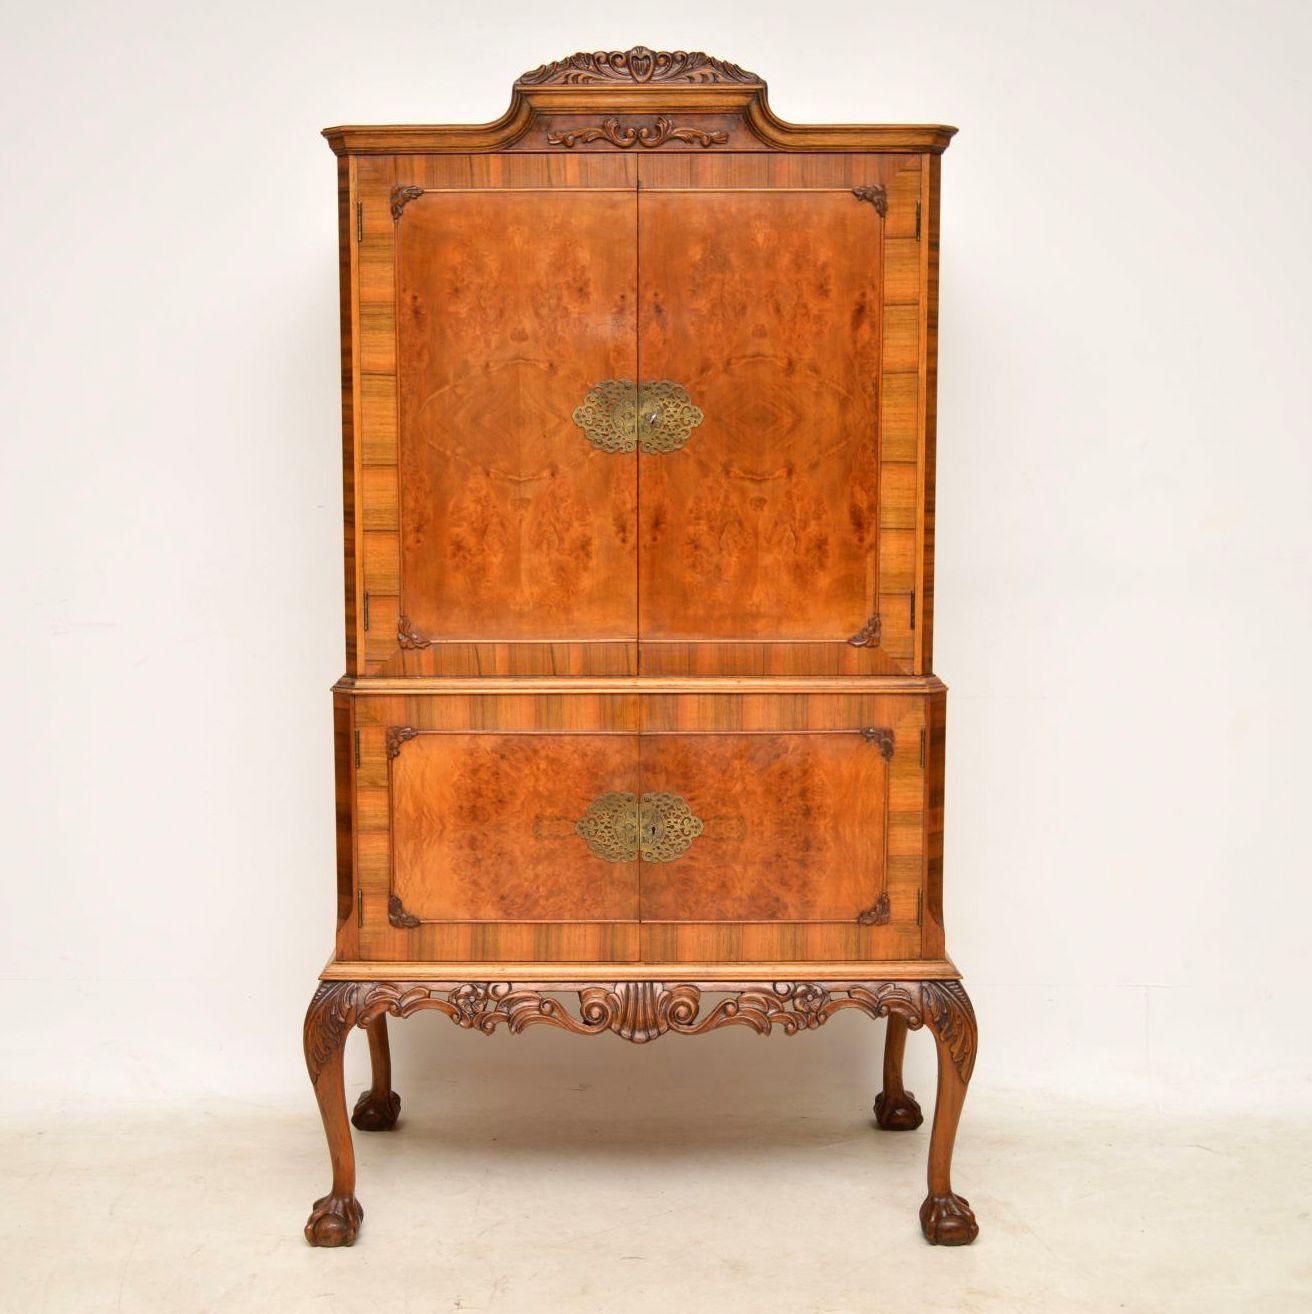 This antique Queen Anne style walnut cocktail drinks cabinet is very fine quality and in good original condition. It has a lovely mellow color and is beautifully carved on the top, plus around the legs, which have claw and ball feet. The four doors